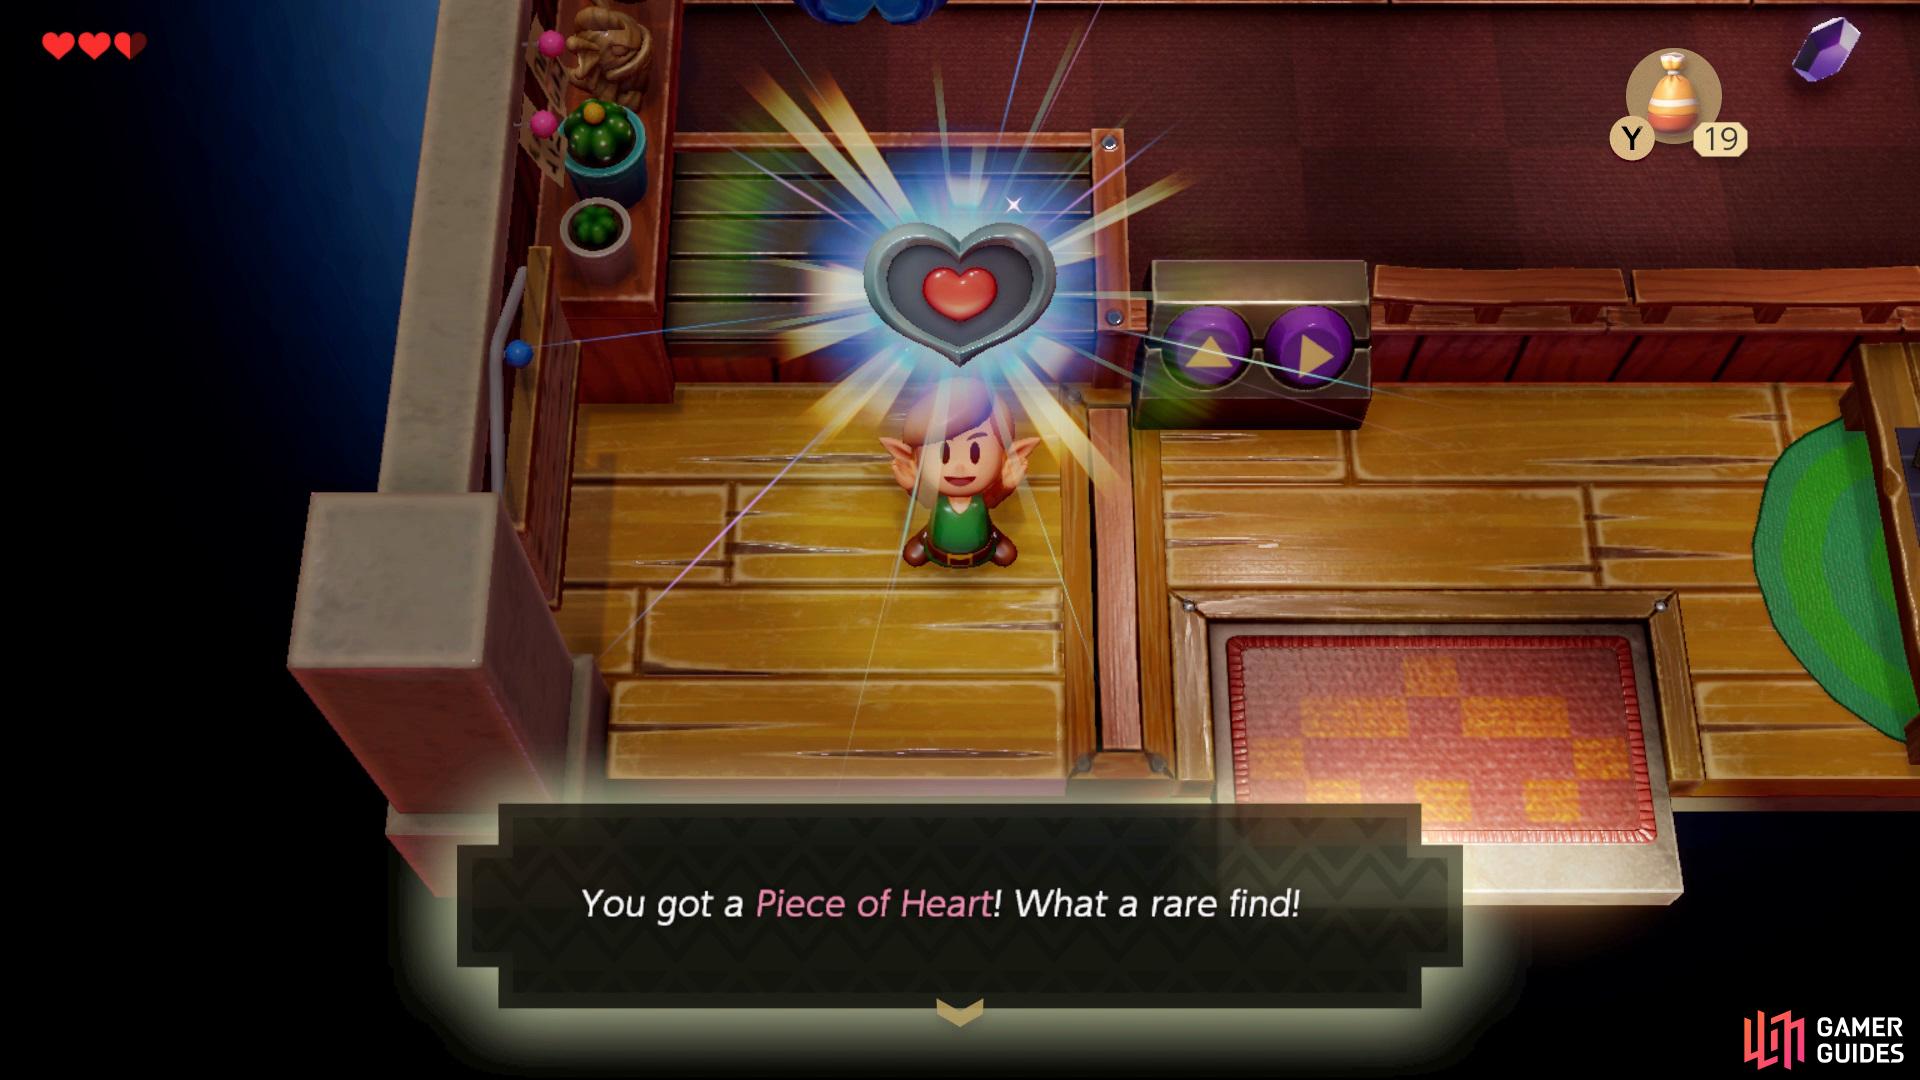 and gain another Piece of Heart alongside a Yoshi Doll.